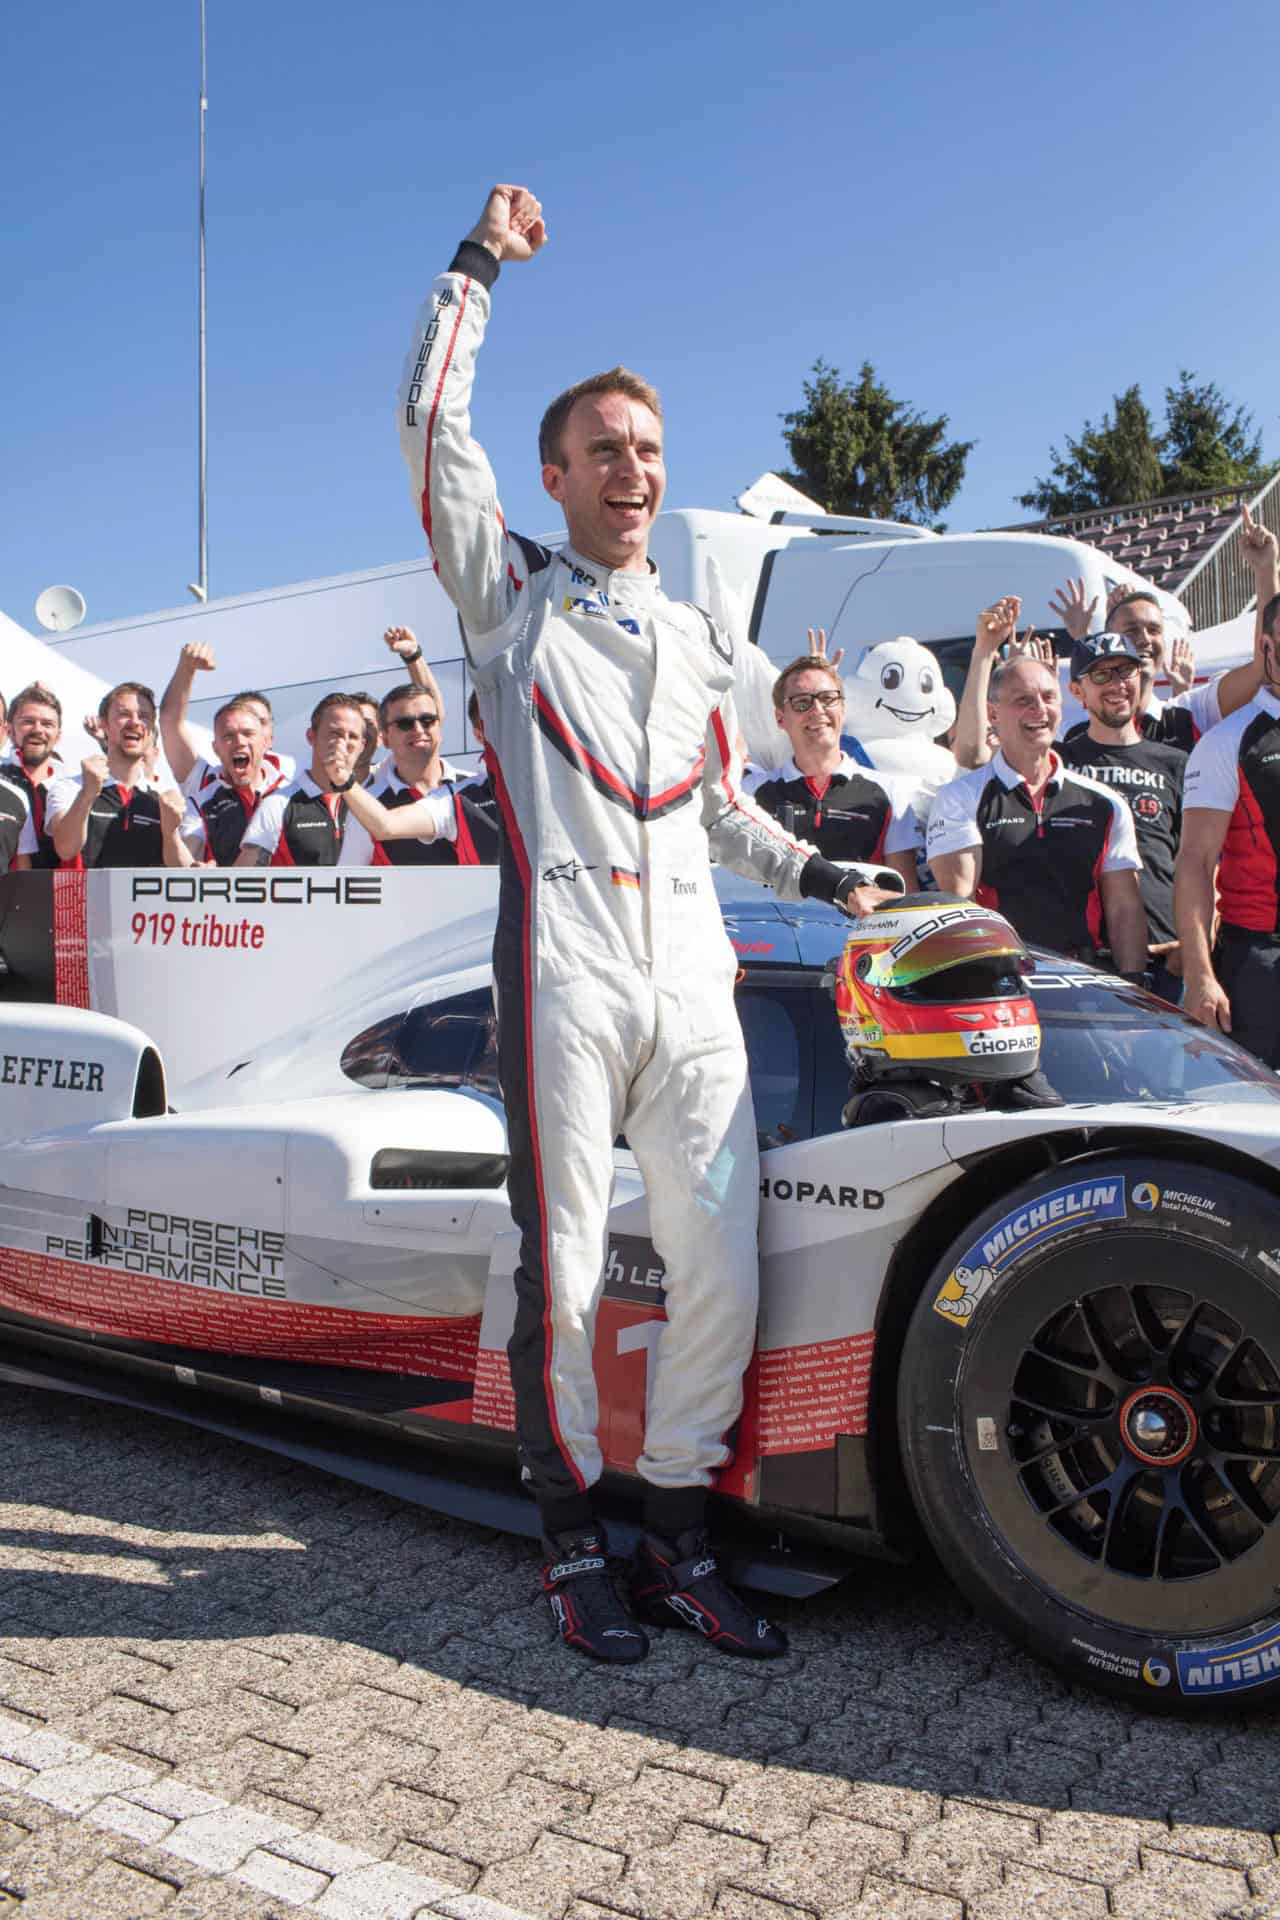 Chopard proud to be associated with Porsche Motorsport and Timo Bernhard in setting a new lap record